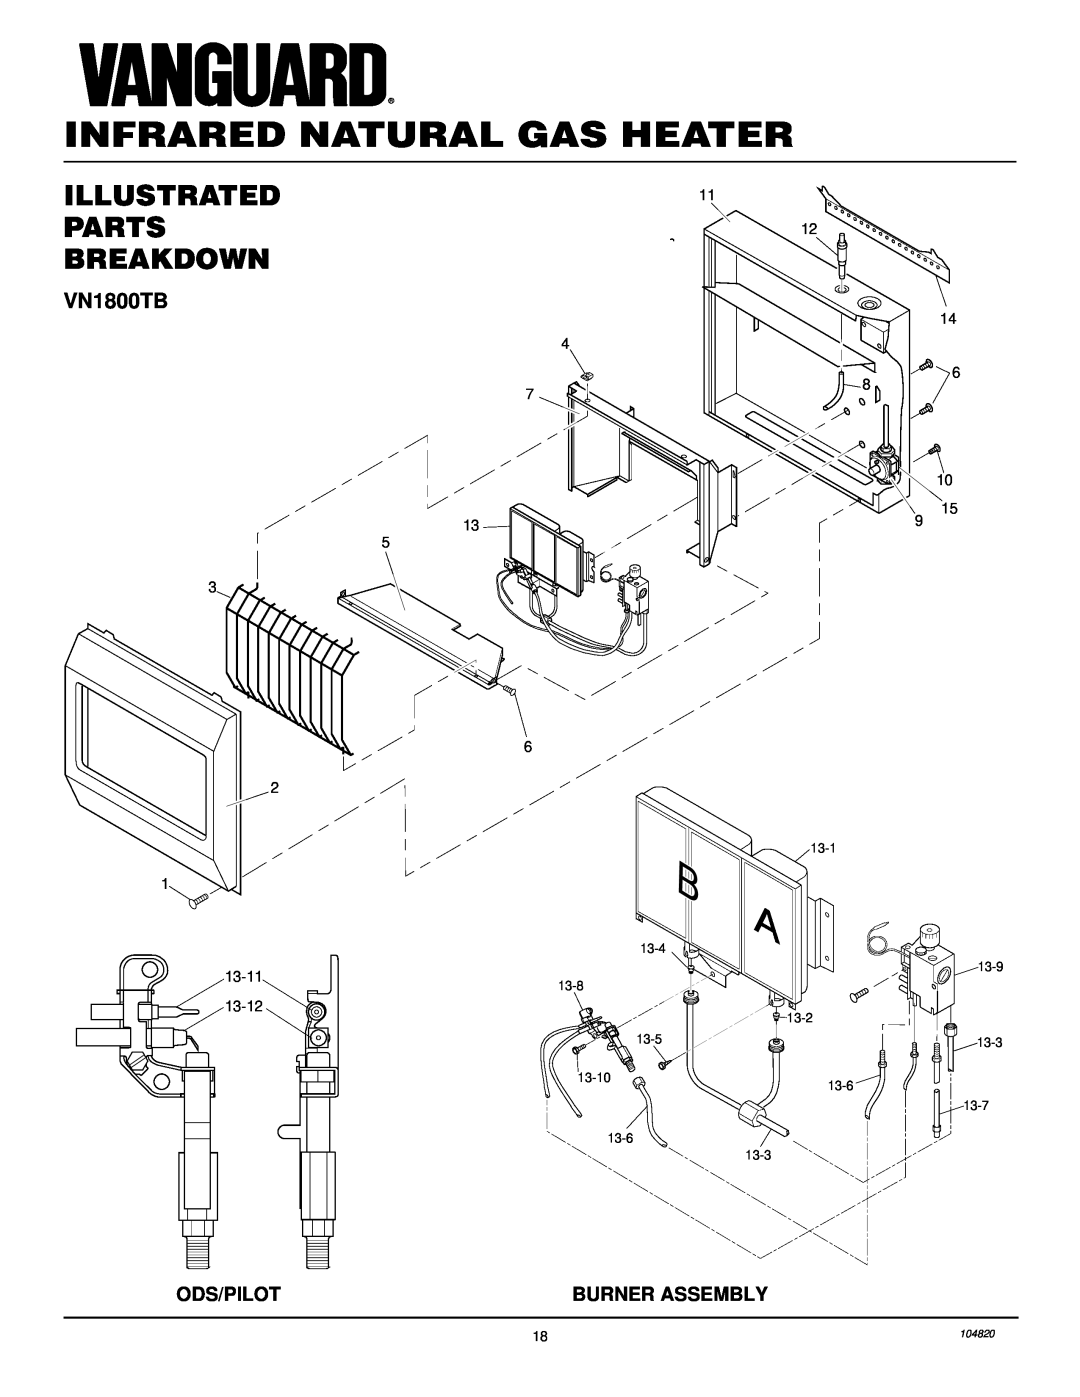 Vanguard Heating VN3000TB Illustrated Parts Breakdown, Infrared Natural Gas Heater, Ods/Pilot, Burner Assembly, 13-1, 13-4 